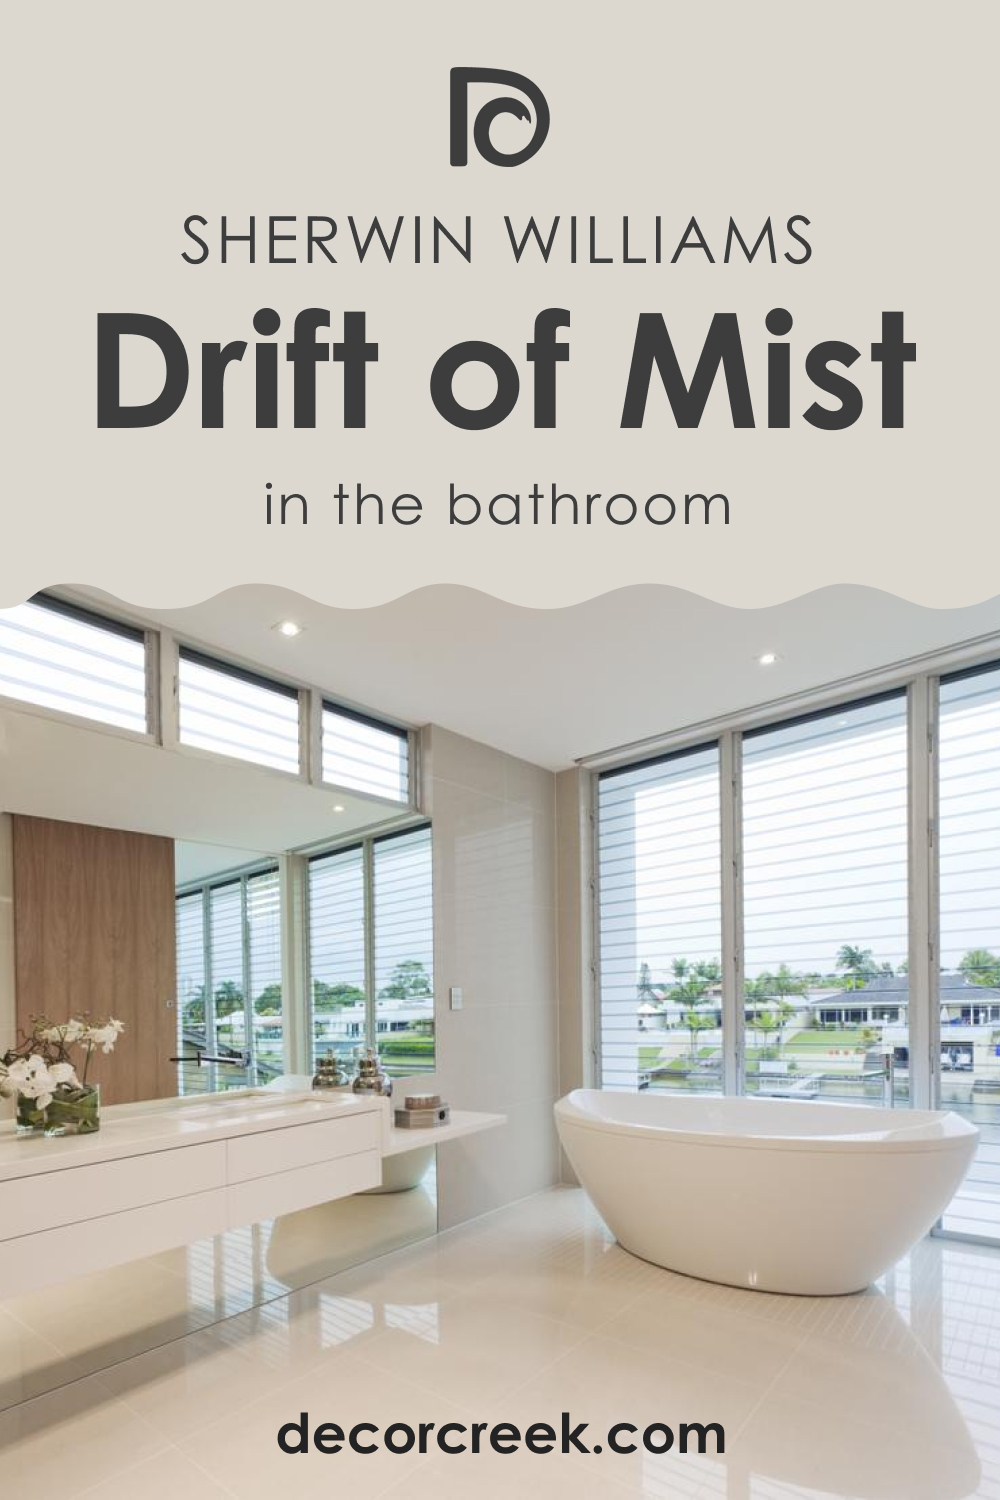 How to Use SW 9166 Drift of Mist in the Bathroom?